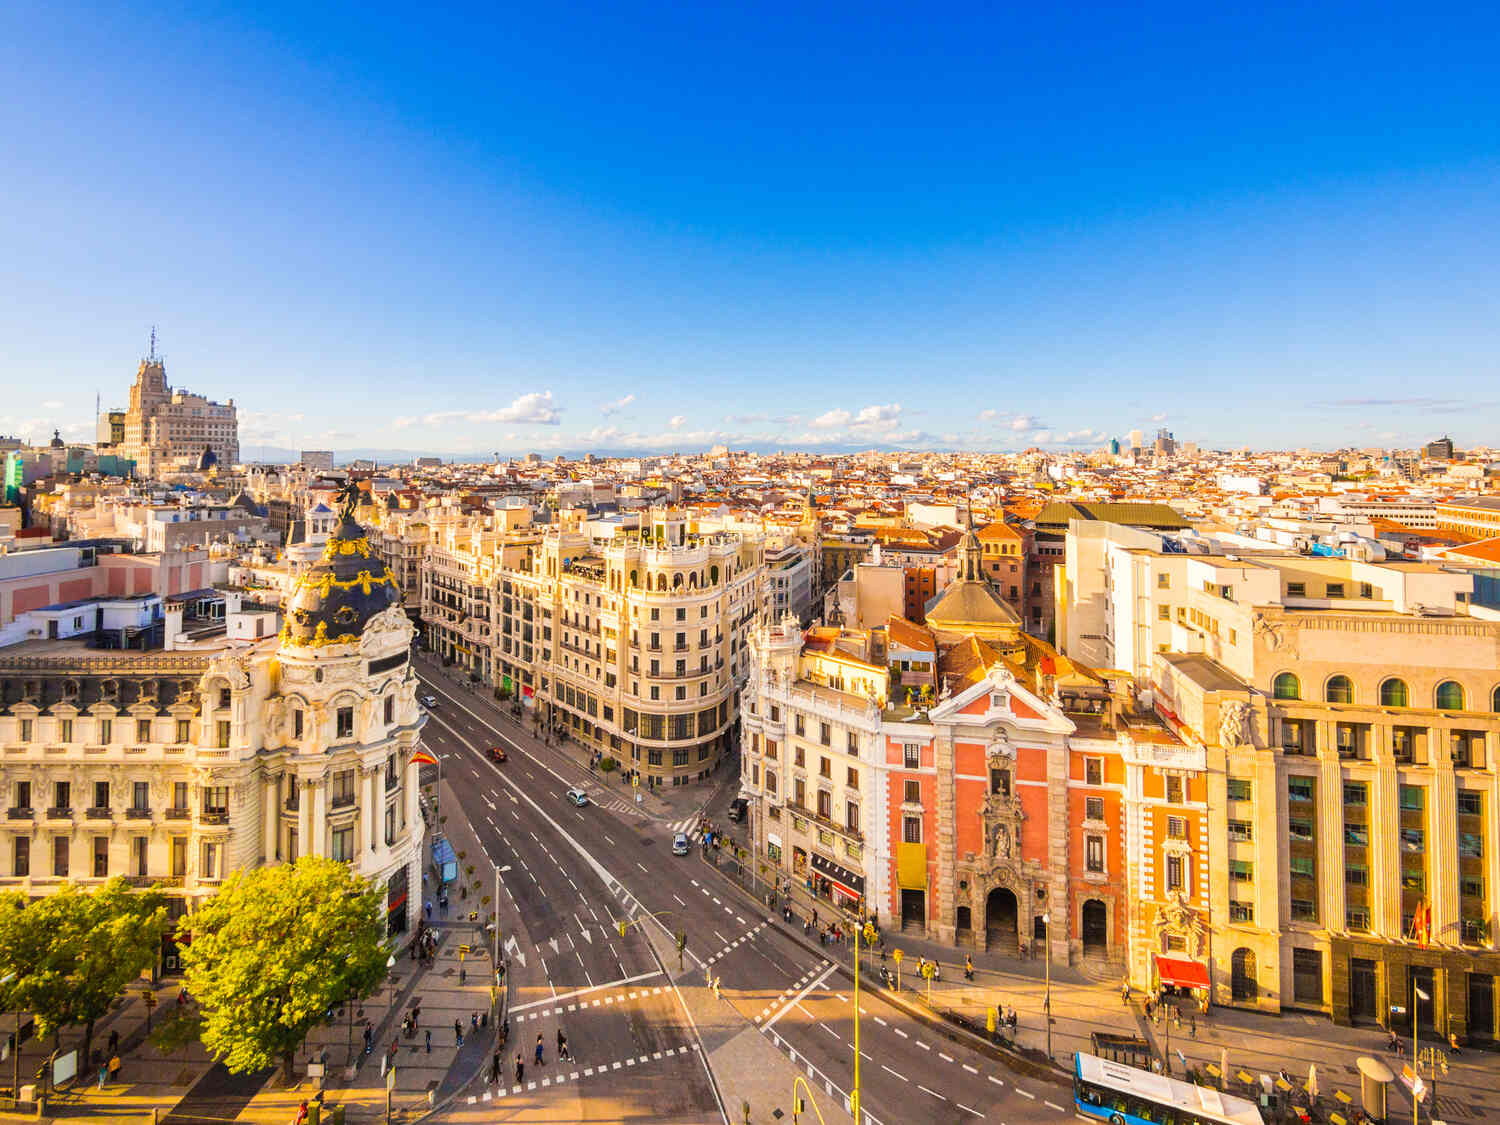 Expansive view of Madrid's city center with iconic buildings and bustling streets.